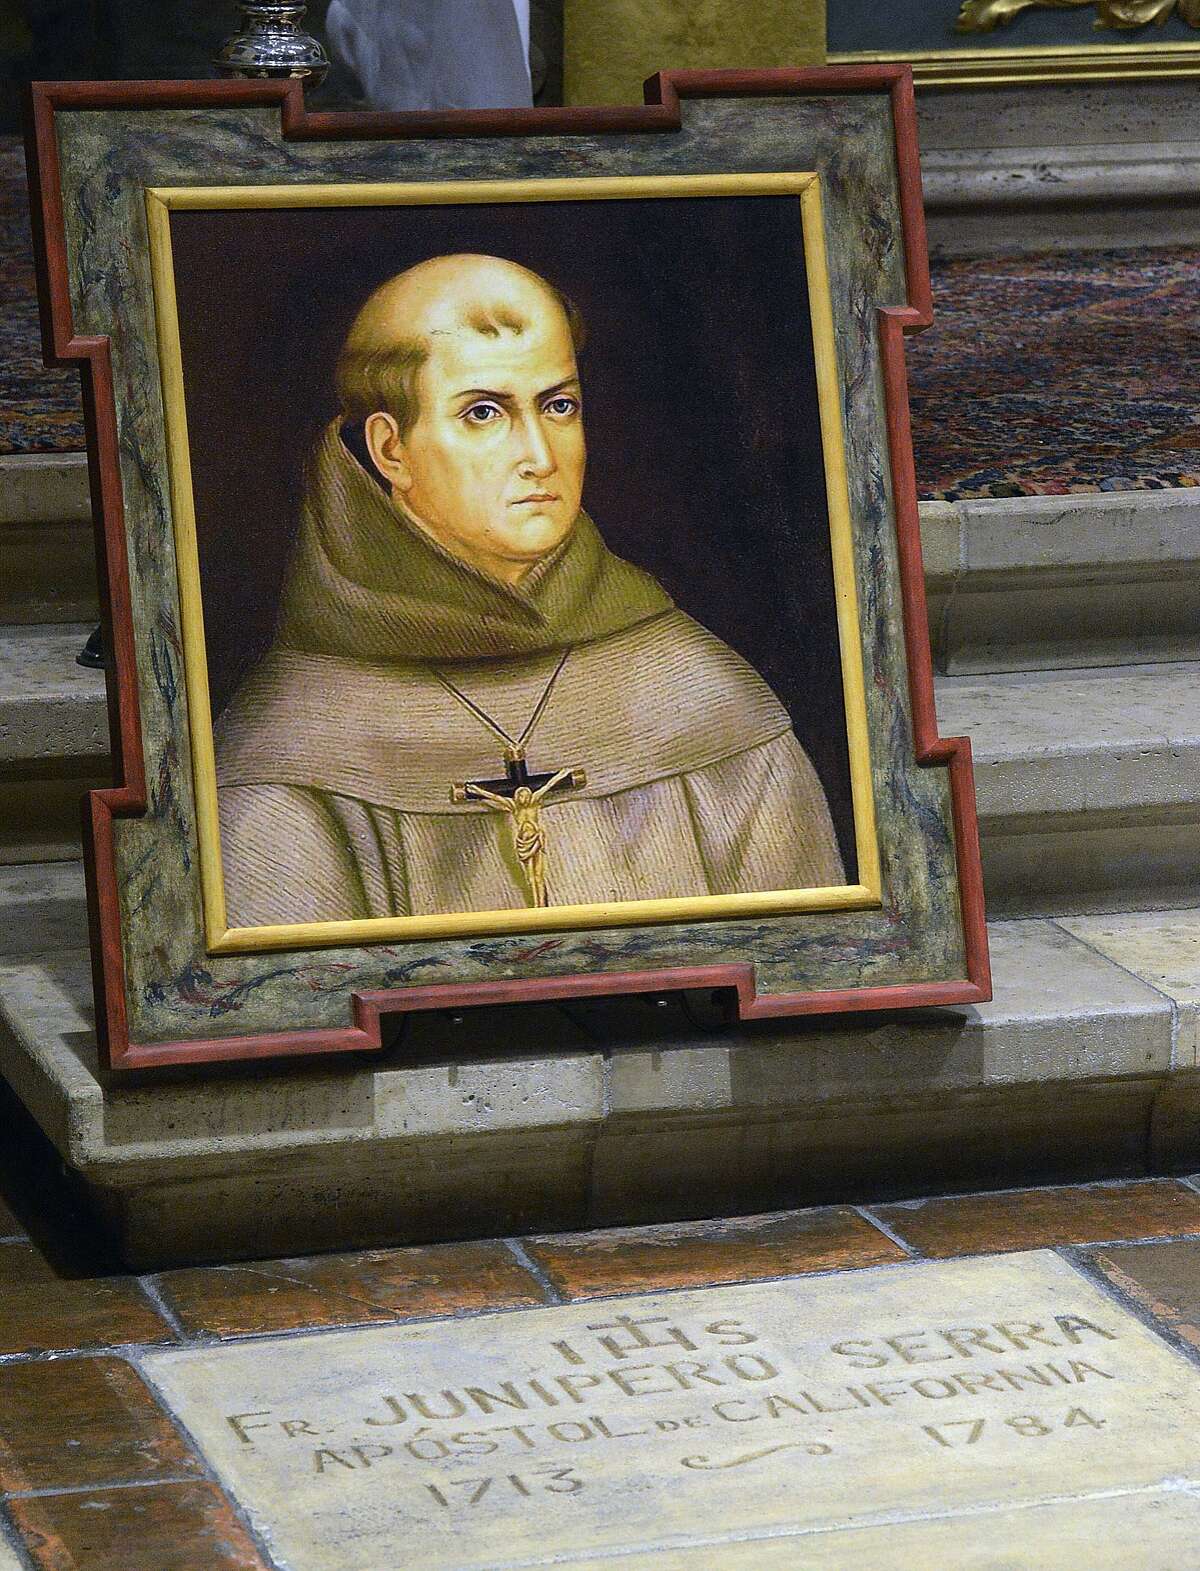 FILE - In this May 6, 2015 file photo, a painting of Rev. Junipero Serra is seen above his grave inside the basilica at the Carmel Mission in Carmel, Calif. Pope Francis' apology for the Roman Catholic Church's crimes against indigenous peoples has not softened opposition among some California Native Americans to his decision to canonize 18th-century Franciscan missionary Junipero Serra, extolled by the Vatican as a great evangelizer, but denounced by some tribal officials as a destroyer of Native culture.(David Royal/The Monterey County Herald via AP, File) MANDATORY CREDIT